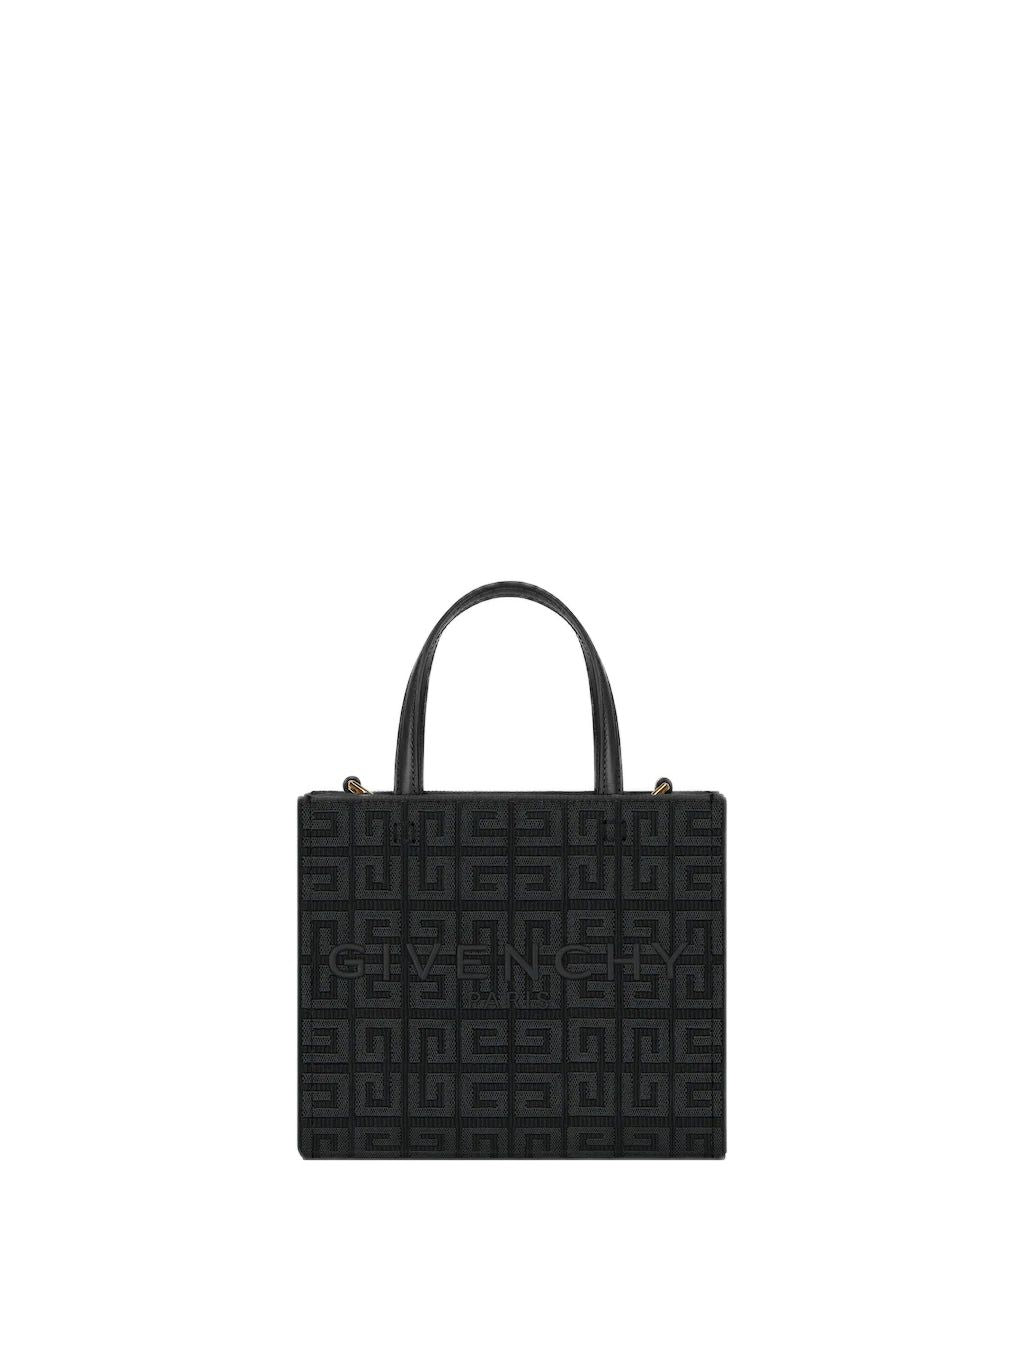 GIVENCHY Mini G Canvas Tote Handbag with Leather Accents and Removable Strap, Black - 19x16x8 cm